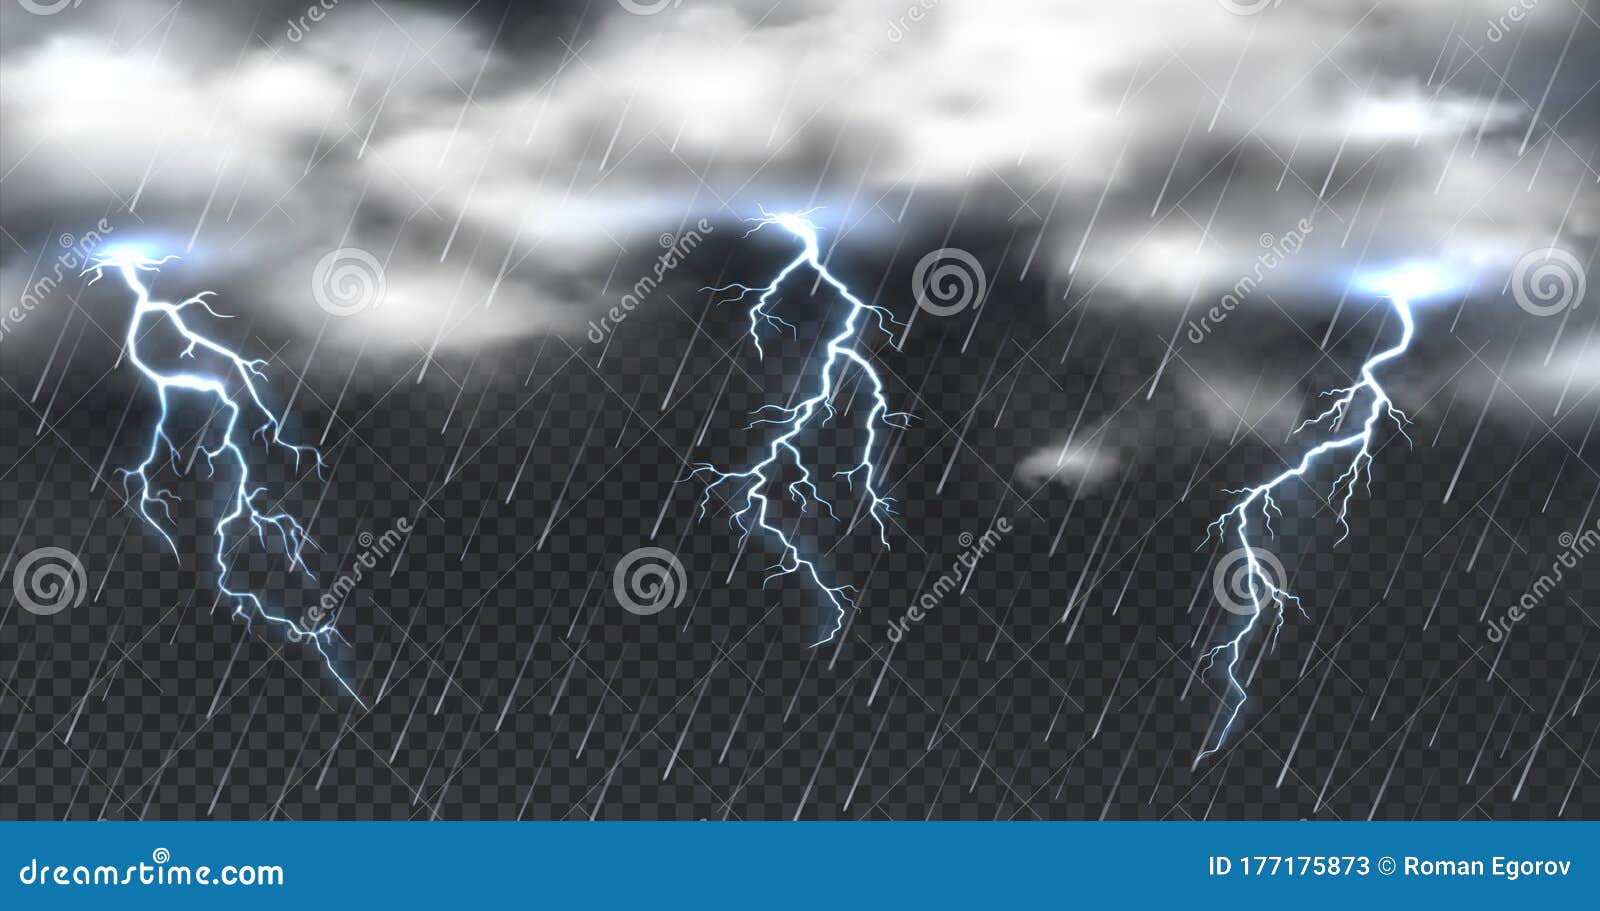 realistic storm. heavy clouds thunder and shower rain on transparent background.  atmosphere phenomenon with